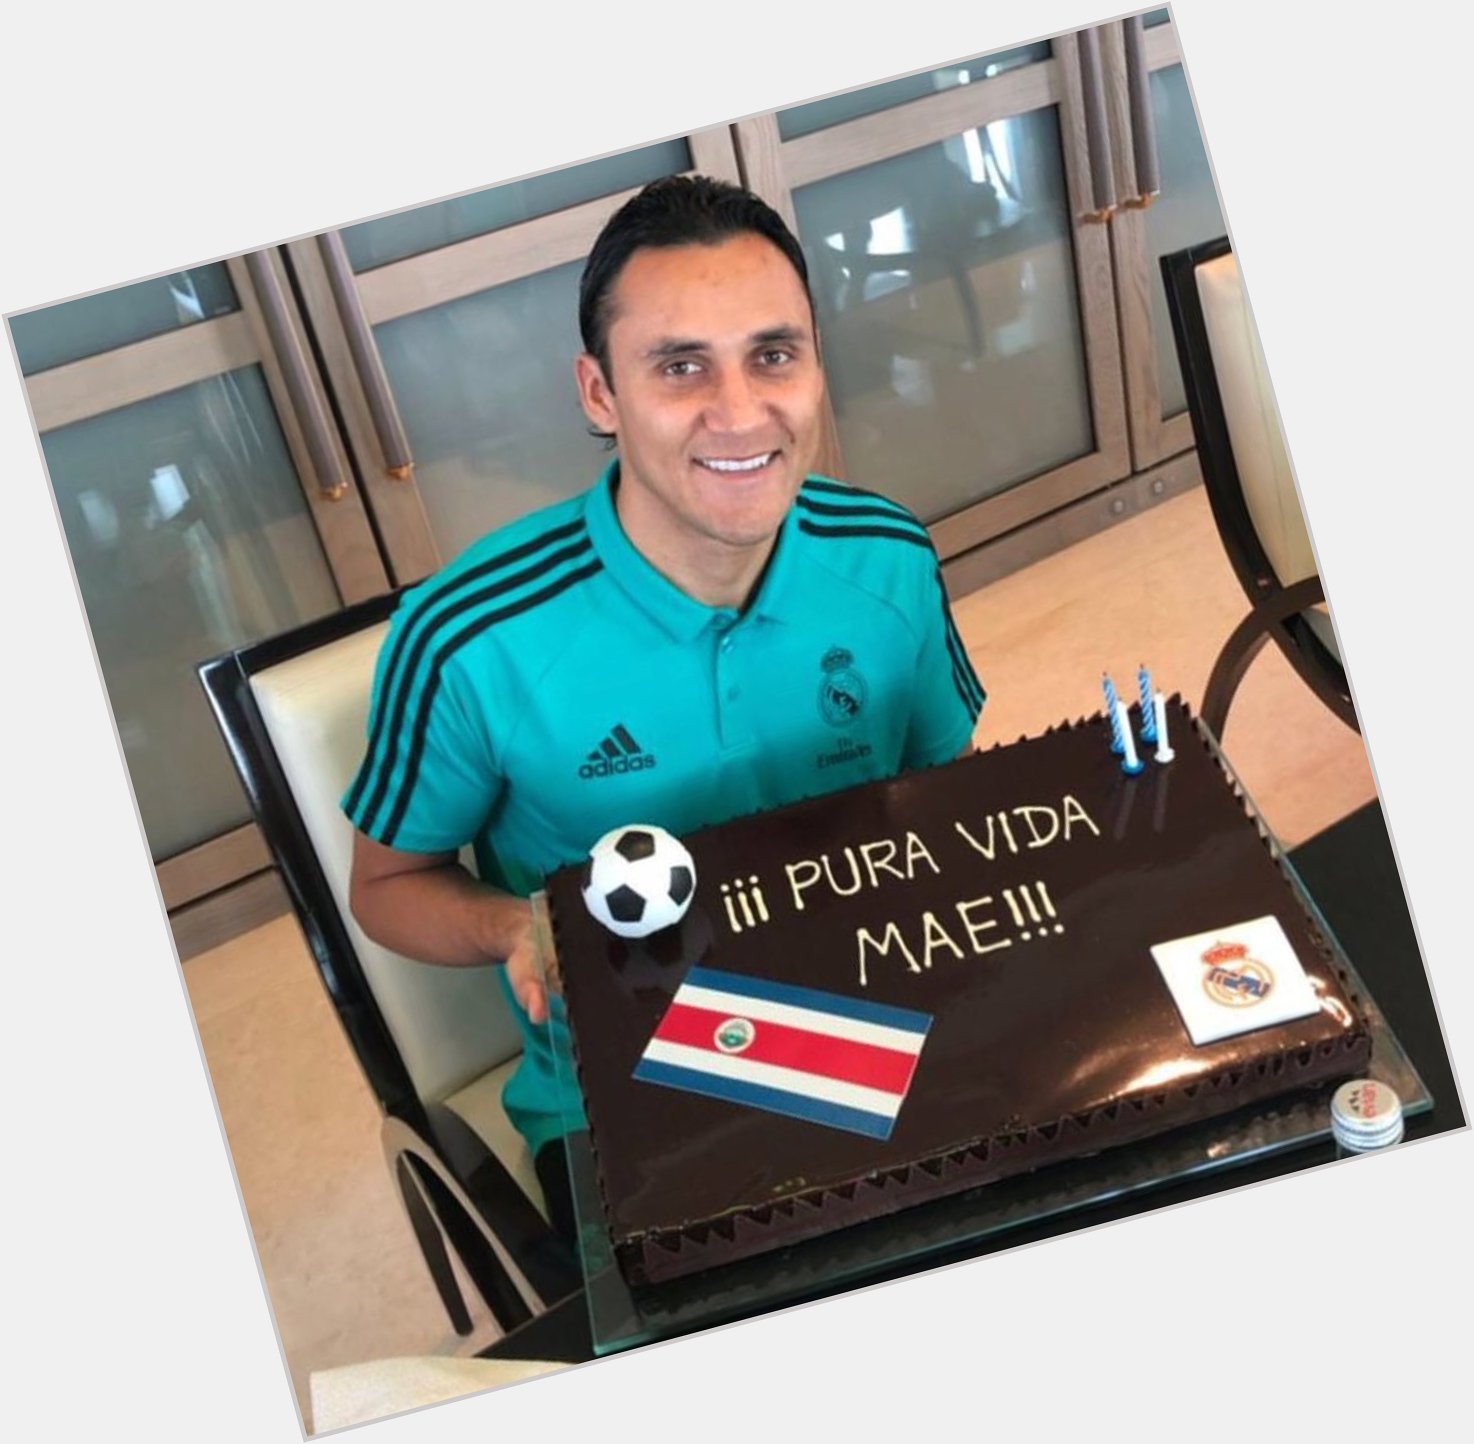 Happy 31st birthday to Keylor Navas.
He\s been good for Madrid in tough times. 